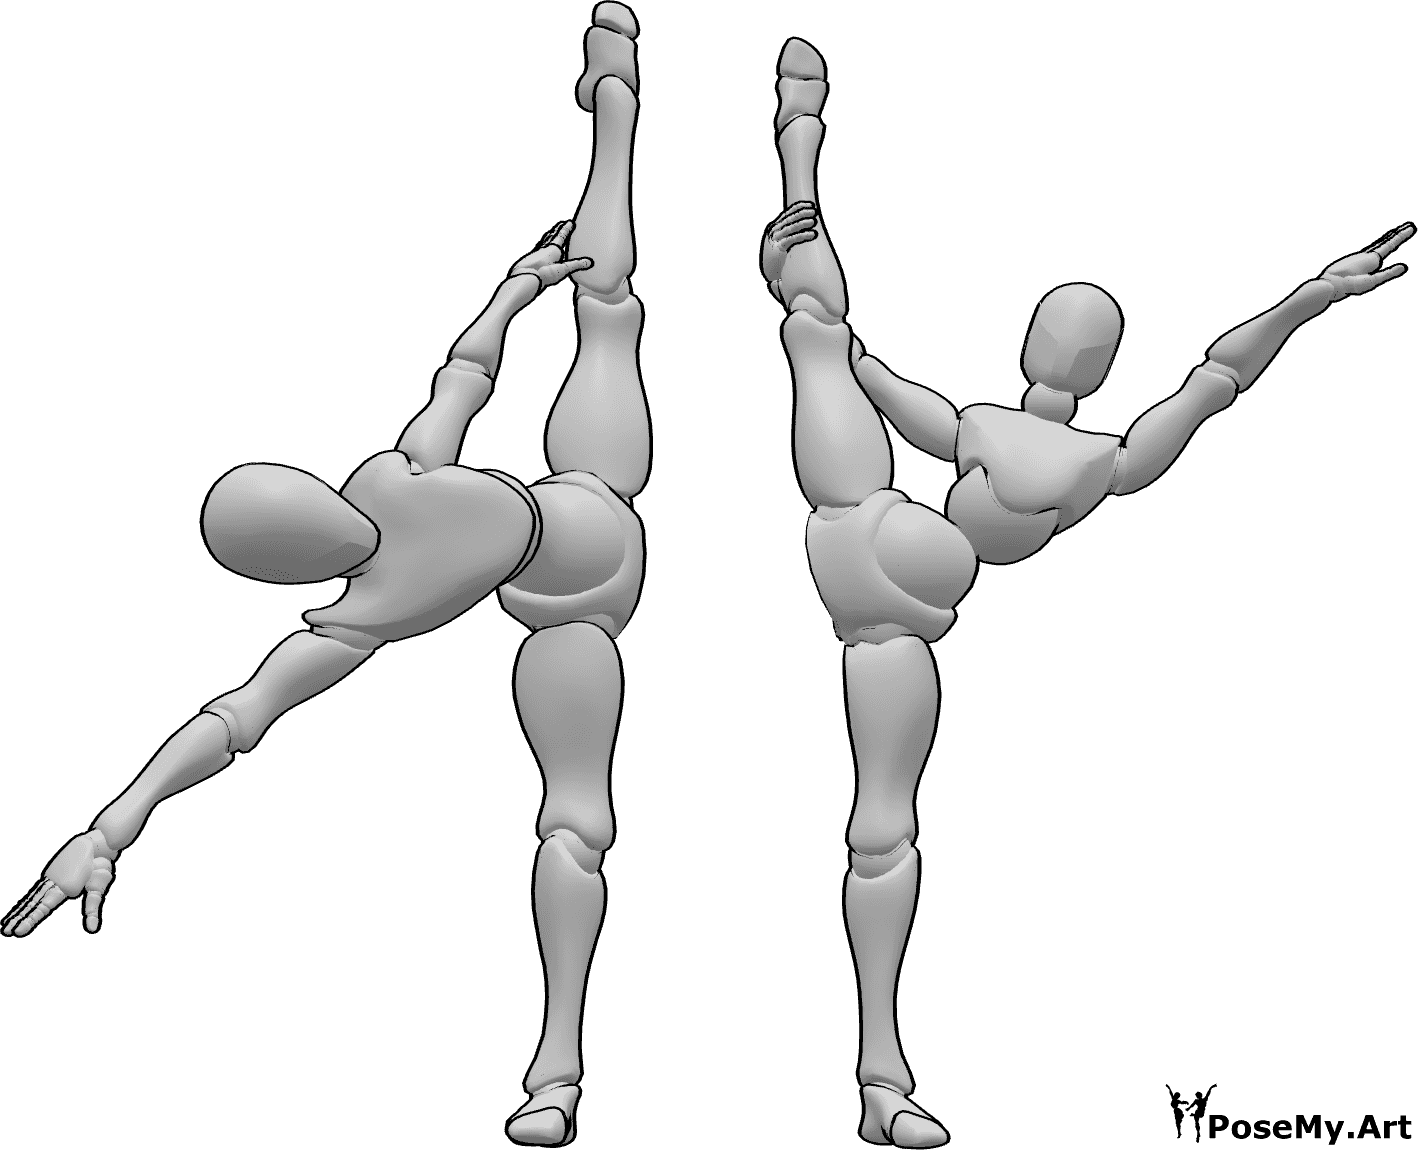 Pose Reference - Standing side splits pose - Two females are doing side splits while standing